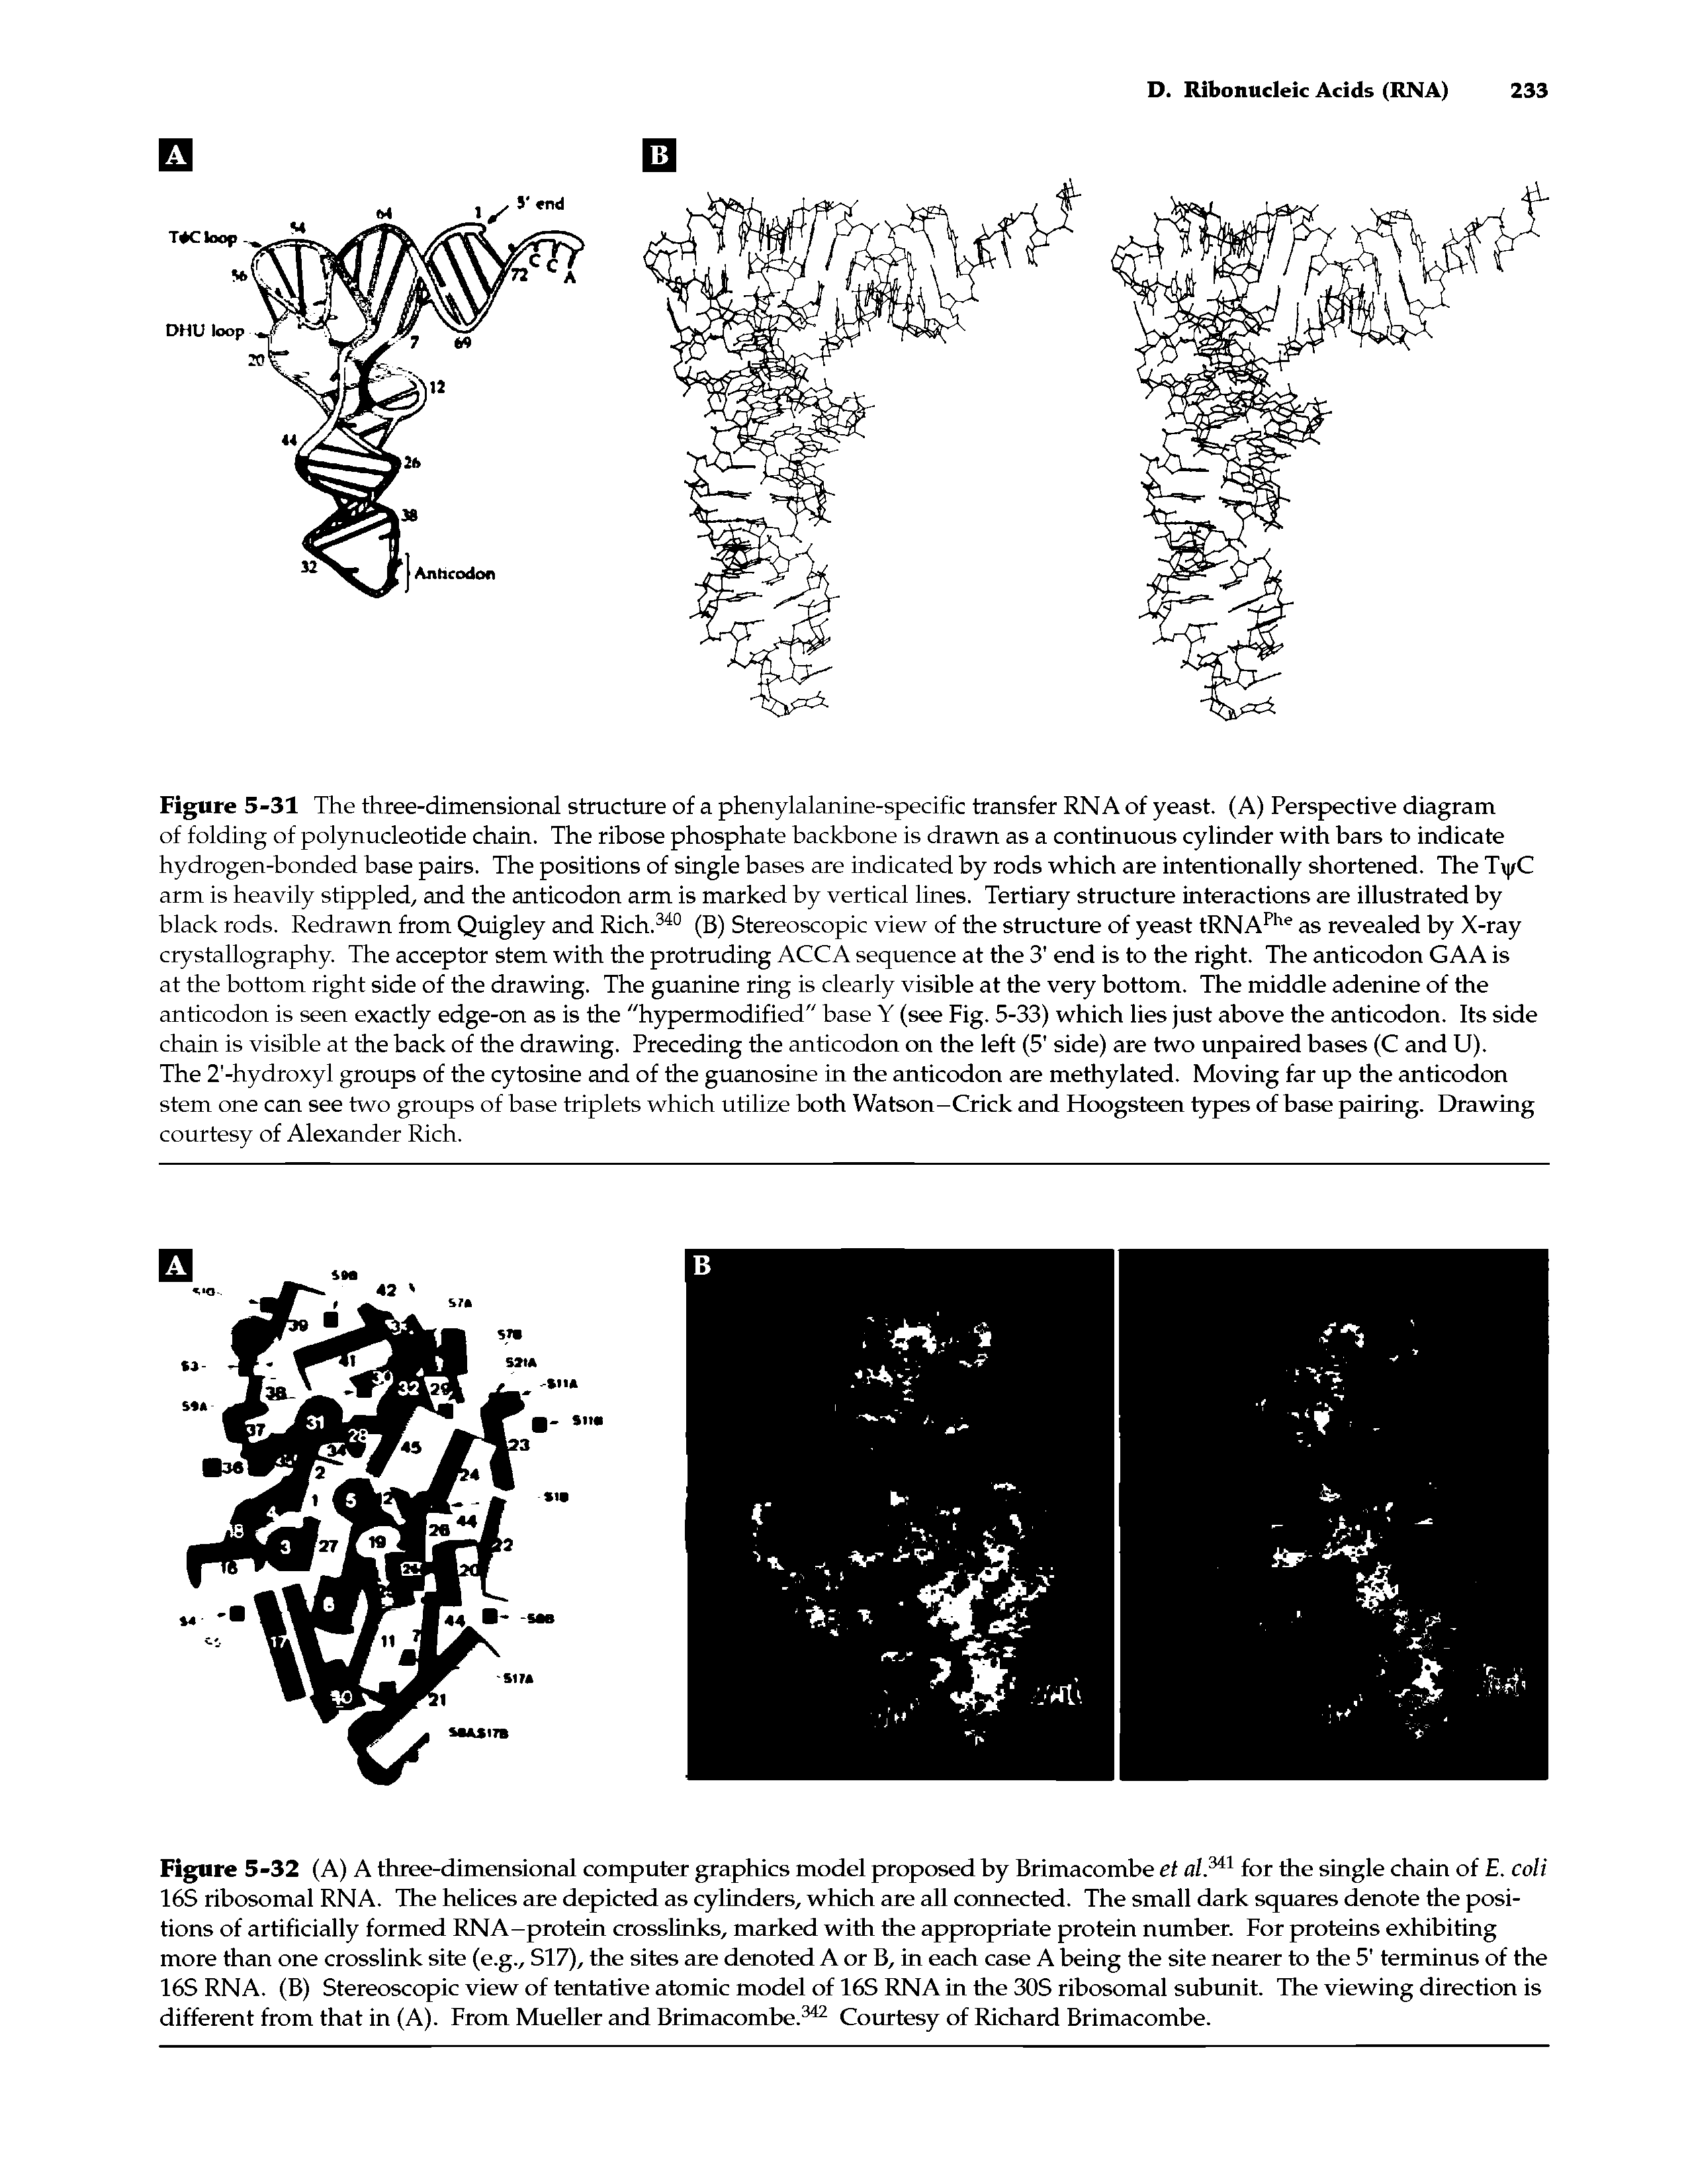 Figure 5-32 (A) A three-dimensional computer graphics model proposed by Brimacombe et a/.3 11 for the single chain of E. coli 16S ribosomal RNA. The helices are depicted as cylinders, which are all connected. The small dark squares denote the positions of artificially formed RNA-protein crosslinks, marked with the appropriate protein number. For proteins exhibiting more than one crosslink site (e.g., SI7), the sites are denoted A or B, in each case A being the site nearer to the 5 terminus of the 16S RNA. (B) Stereoscopic view of tentative atomic model of 16S RNA in the 30S ribosomal subunit. The viewing direction is different from that in (A). From Mueller and Brimacombe.342 Courtesy of Richard Brimacombe.